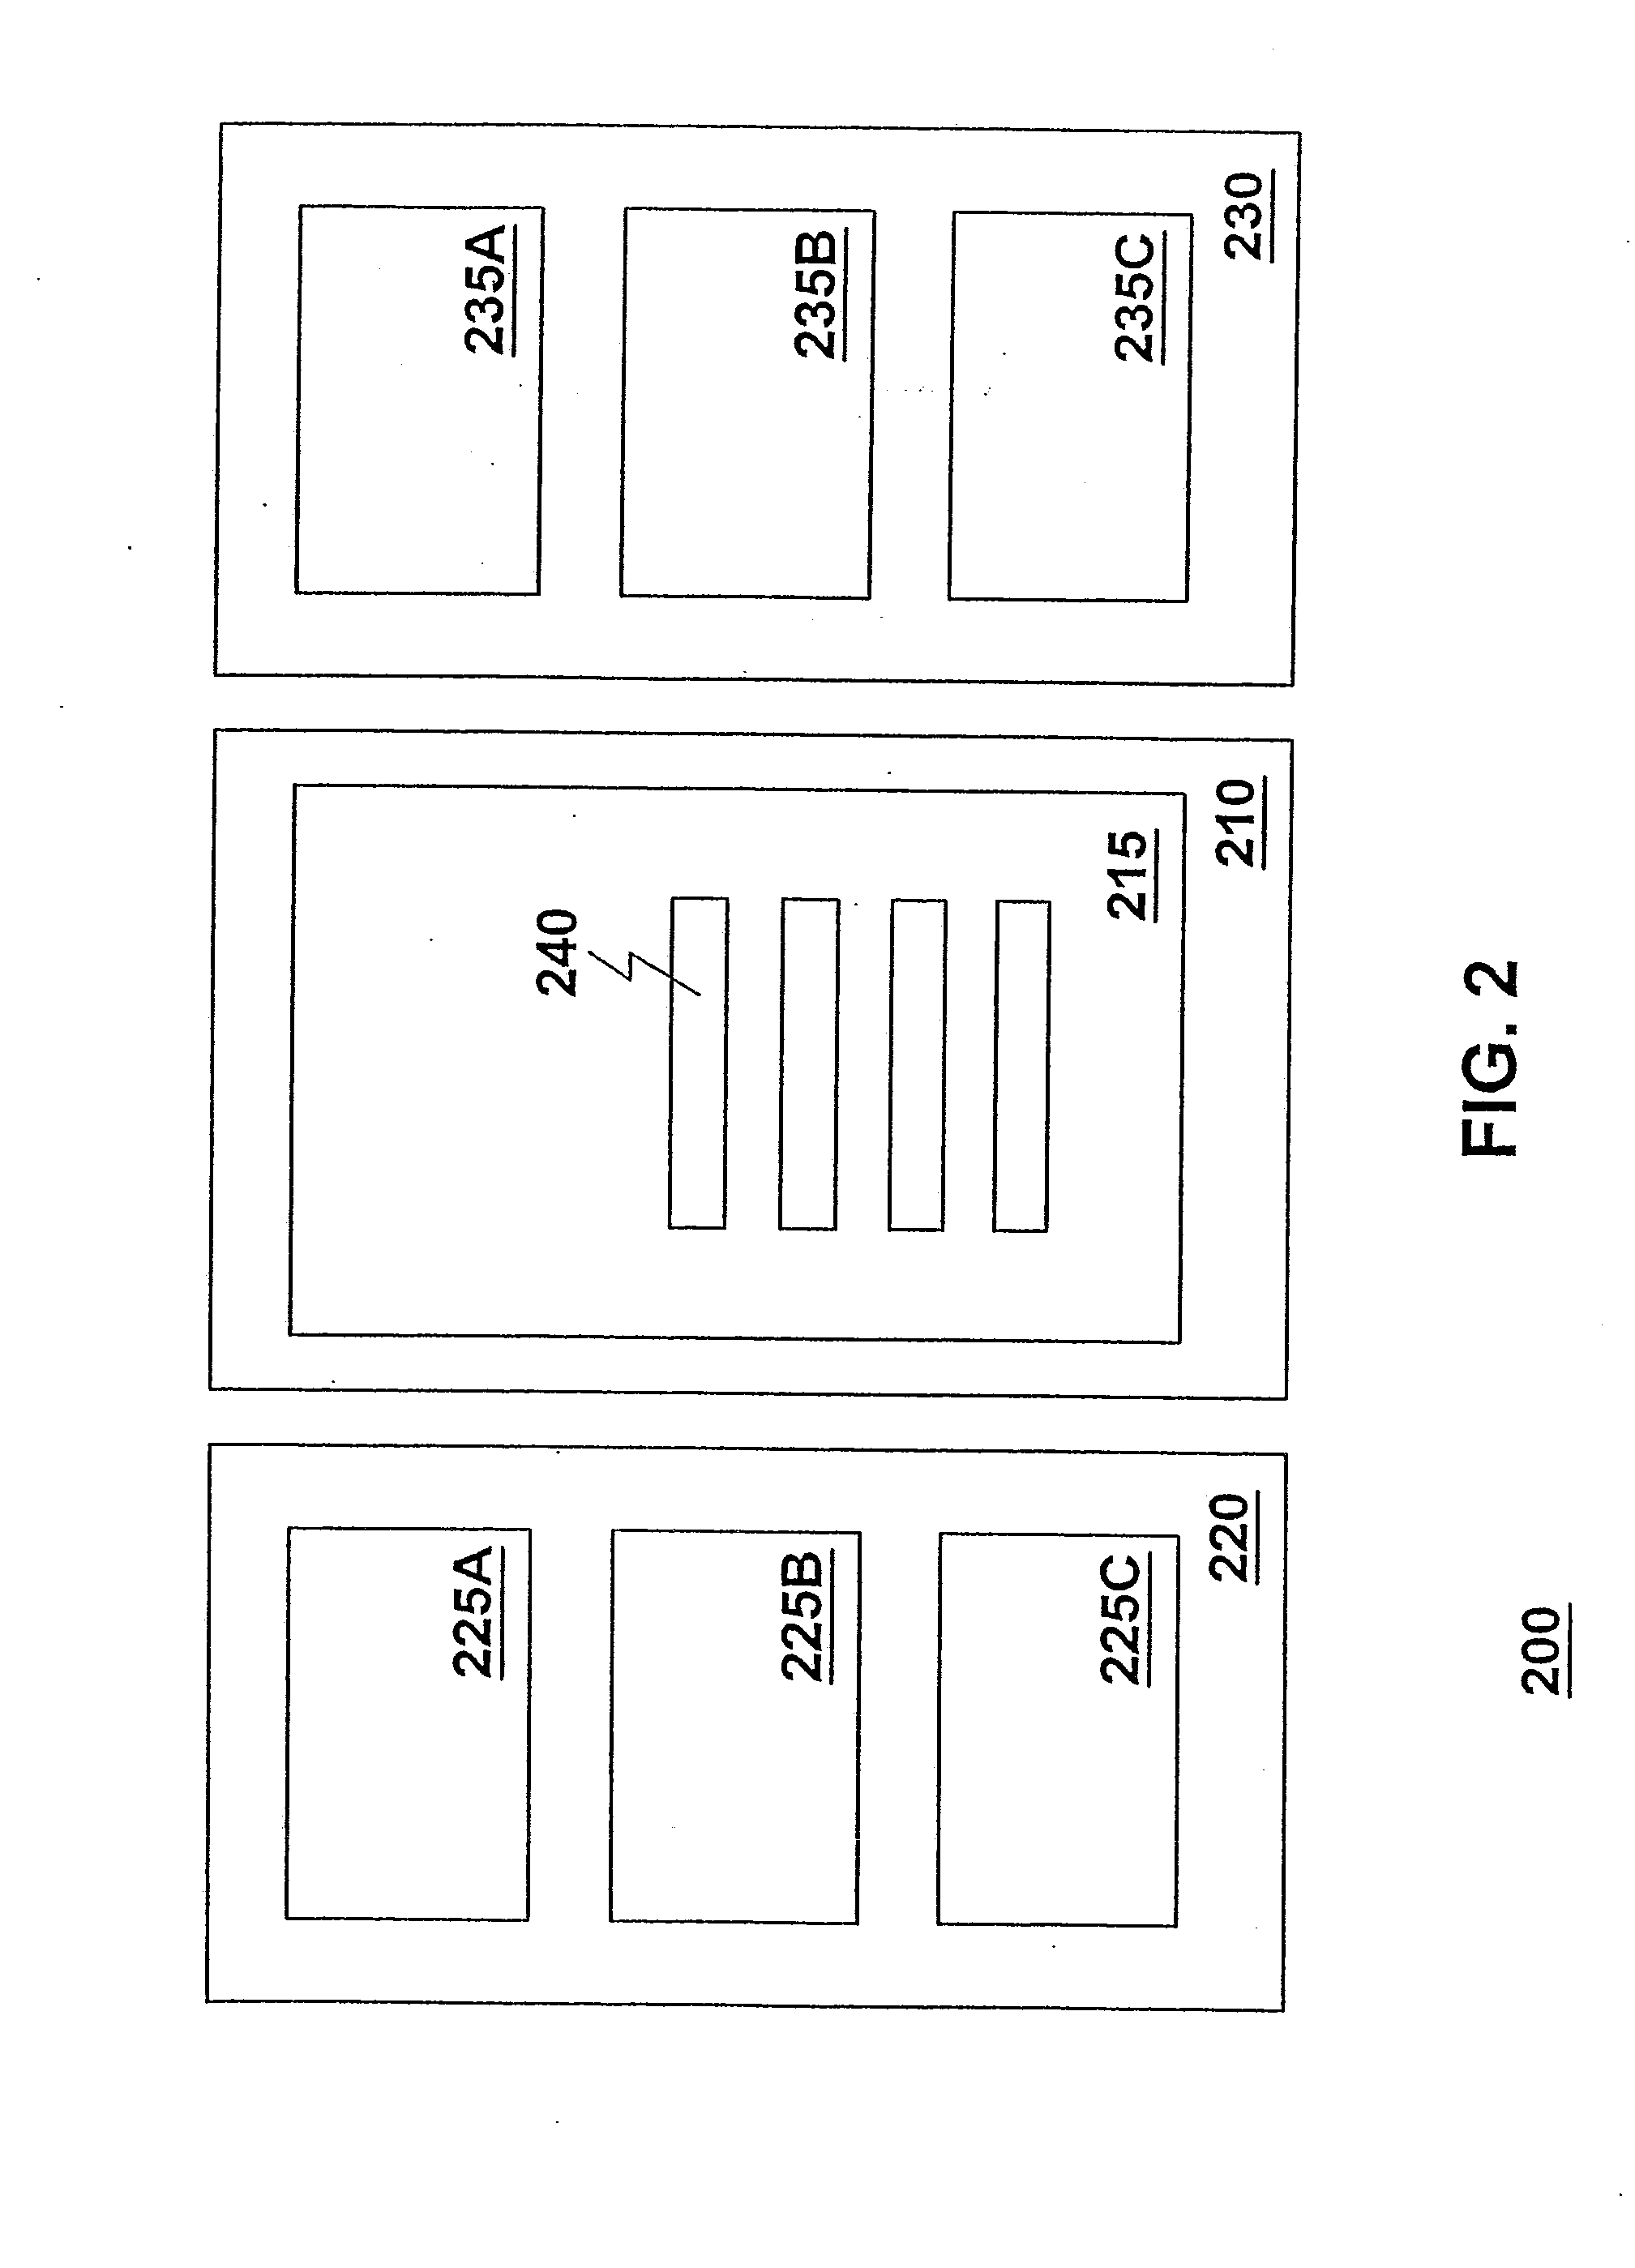 System and method for web browsing